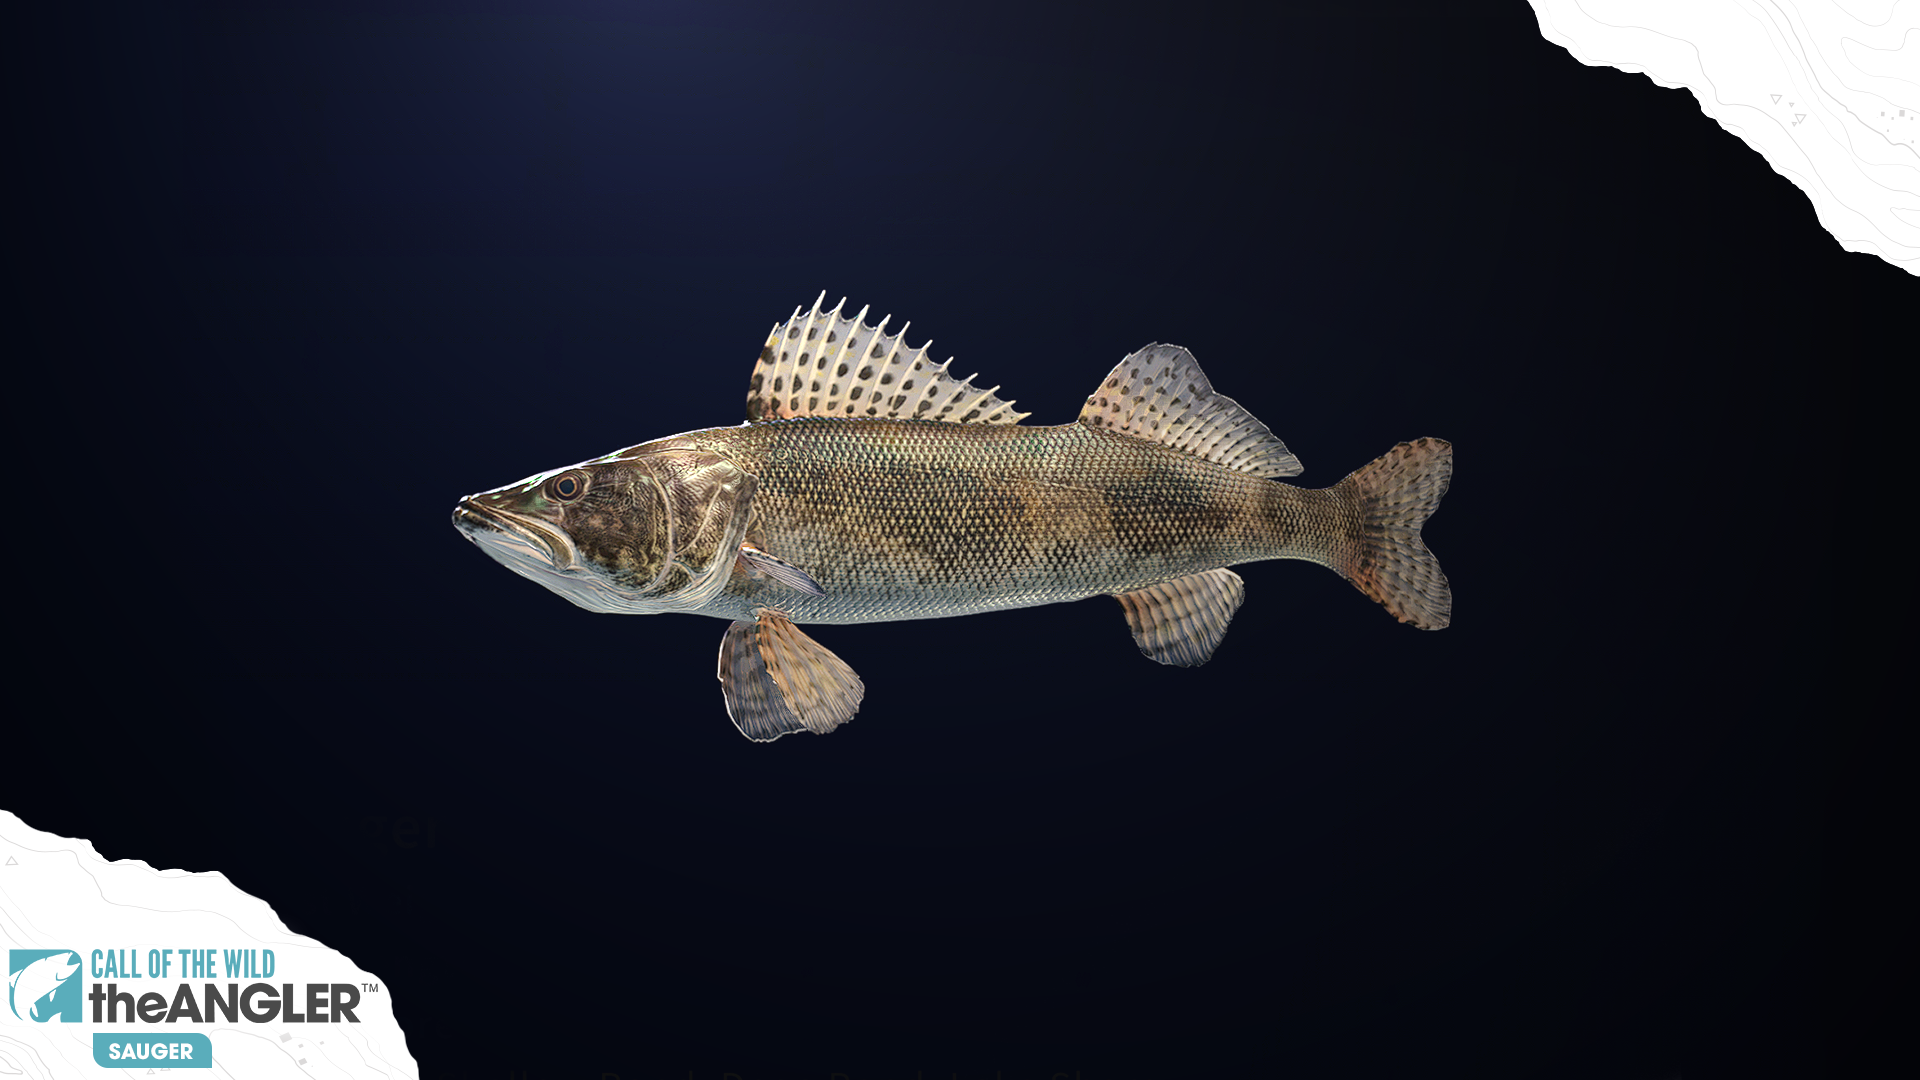 An image of the fish species, Sauger.